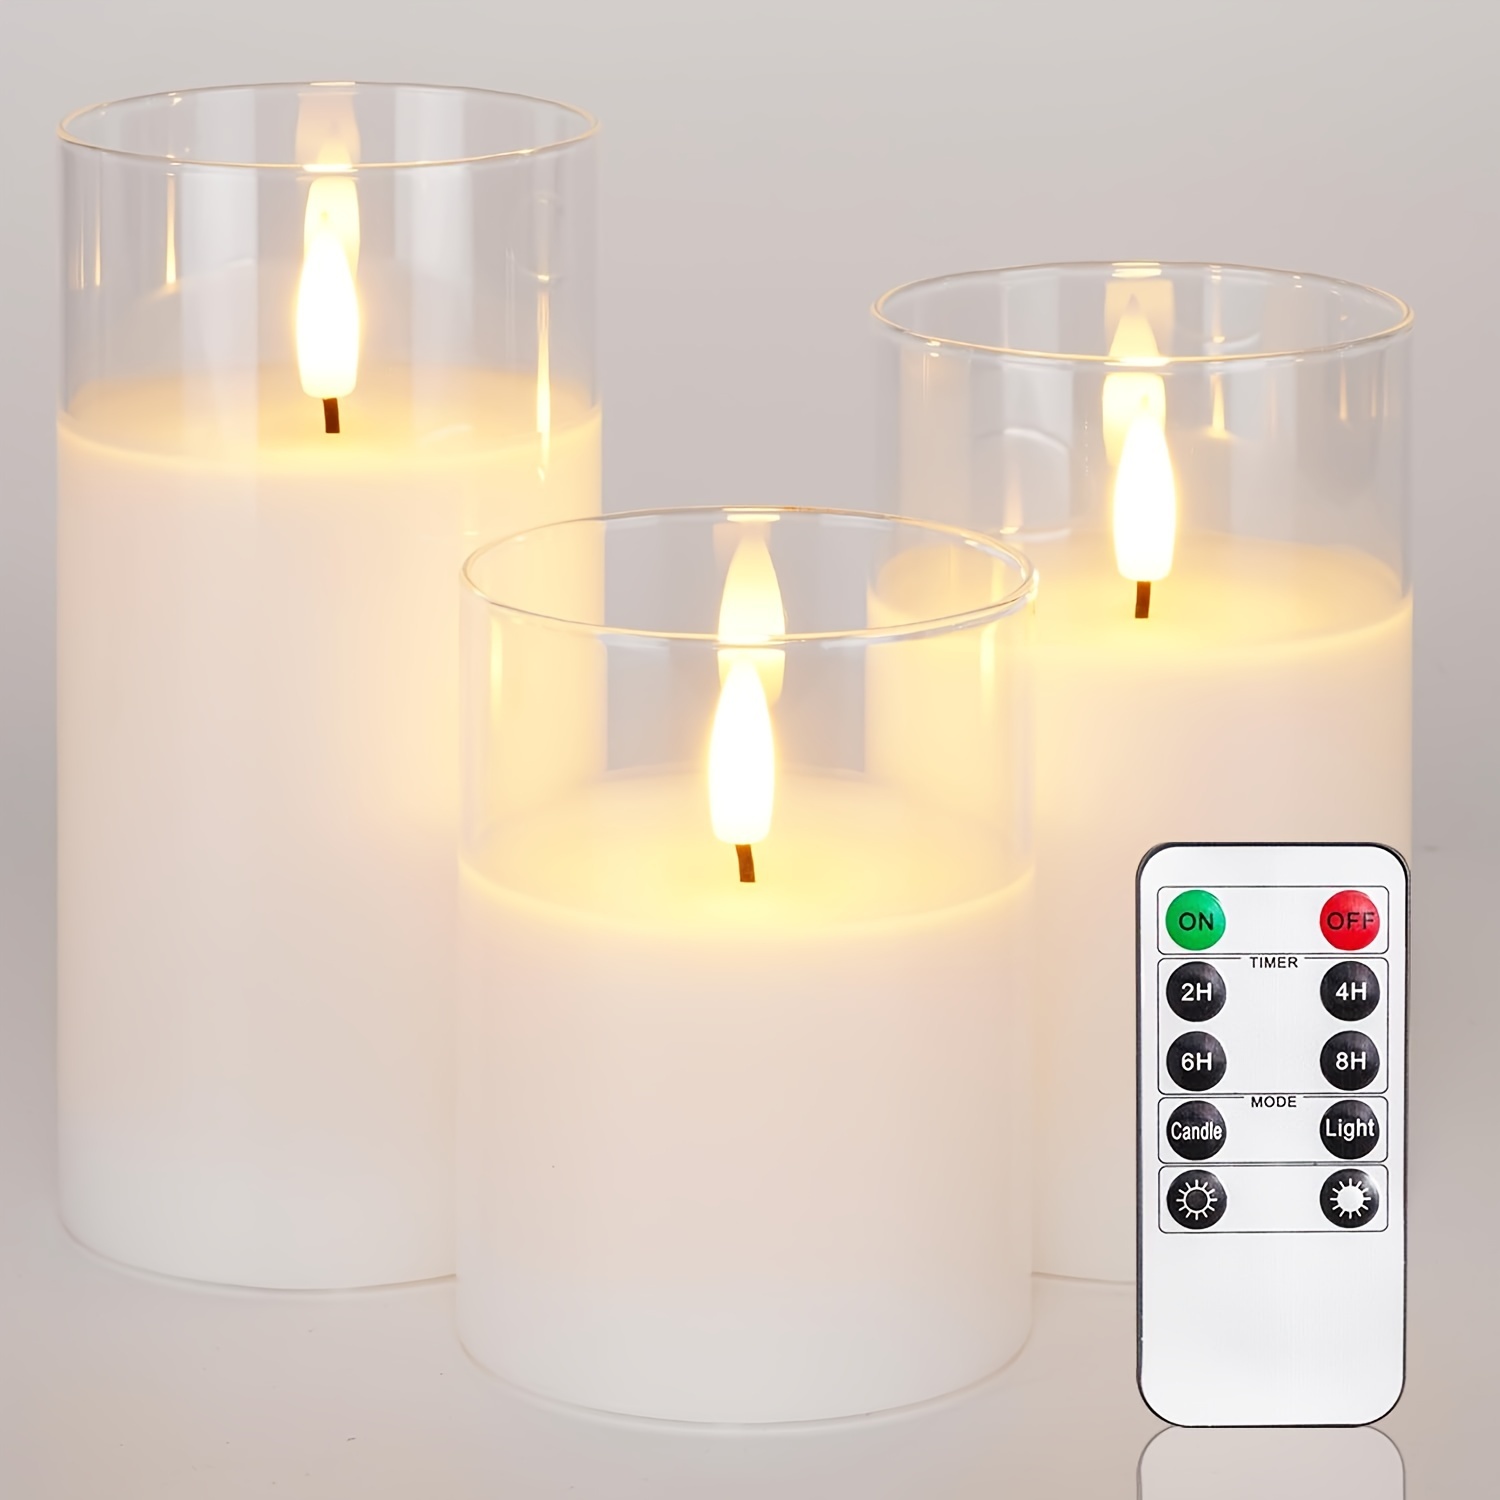 

3pcs Glass Flameless Candles, Pure White Wax Battery Operated Candles, Led Pillar Candles With Remote Control And Timers, D3 H4 5" 6", Home Holidays Party Decor